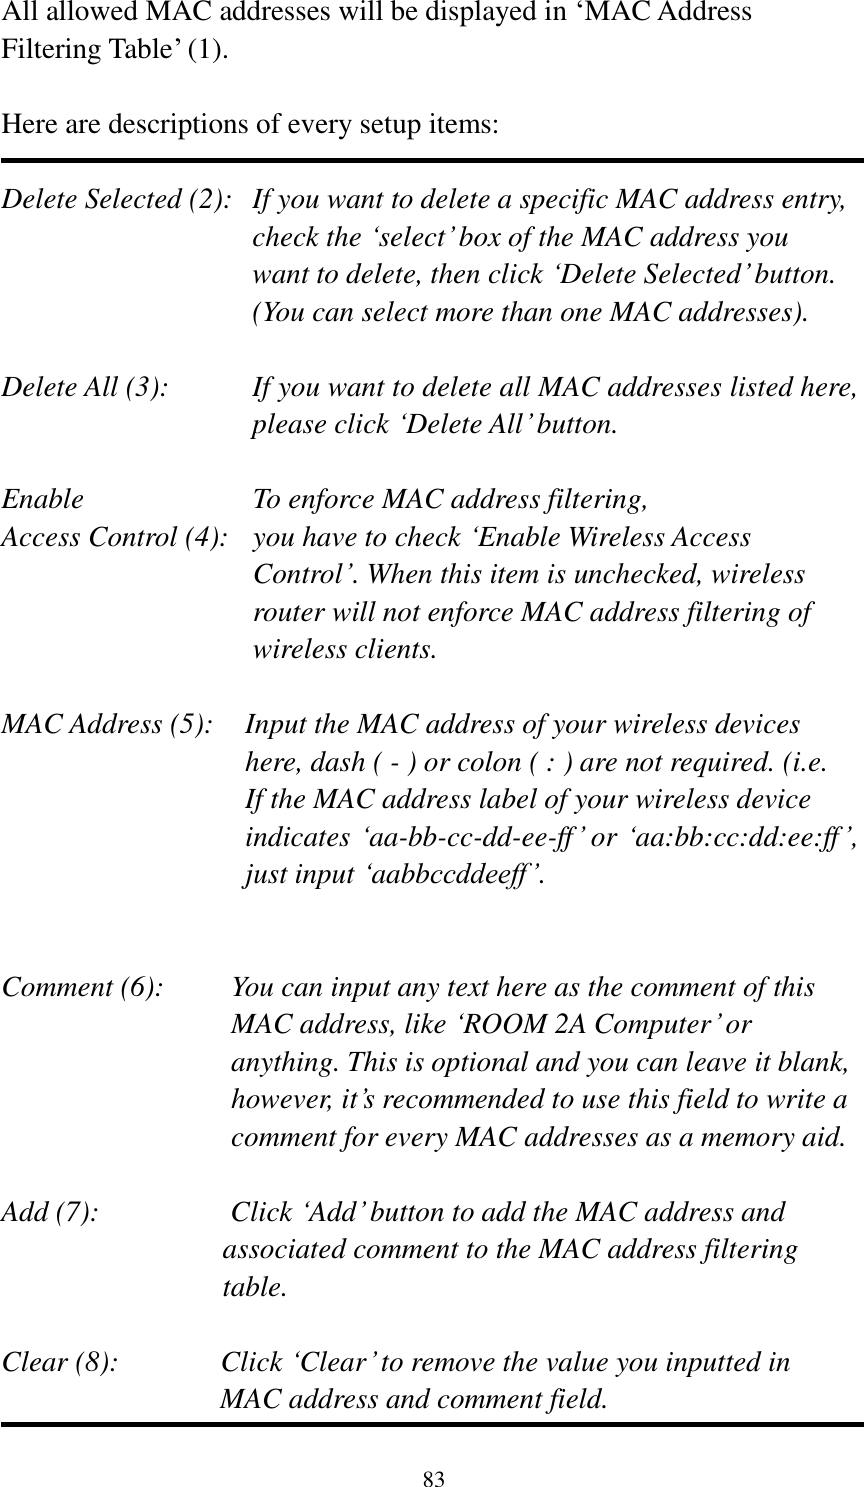 83 All allowed MAC addresses will be displayed in „MAC Address Filtering Table‟ (1).    Here are descriptions of every setup items:  Delete Selected (2):   If you want to delete a specific MAC address entry, check the „select‟ box of the MAC address you want to delete, then click „Delete Selected‟ button. (You can select more than one MAC addresses).  Delete All (3):    If you want to delete all MAC addresses listed here, please click „Delete All‟ button.  Enable      To enforce MAC address filtering, Access Control (4):   you have to check „Enable Wireless Access Control‟. When this item is unchecked, wireless router will not enforce MAC address filtering of wireless clients.  MAC Address (5):    Input the MAC address of your wireless devices here, dash ( - ) or colon ( : ) are not required. (i.e. If the MAC address label of your wireless device indicates „aa-bb-cc-dd-ee-ff‟ or „aa:bb:cc:dd:ee:ff‟, just input „aabbccddeeff‟.   Comment (6):    You can input any text here as the comment of this MAC address, like „ROOM 2A Computer‟ or anything. This is optional and you can leave it blank, however, it‟s recommended to use this field to write a comment for every MAC addresses as a memory aid.  Add (7):                  Click „Add‟ button to add the MAC address and   associated comment to the MAC address filtering   table.  Clear (8):              Click „Clear‟ to remove the value you inputted in   MAC address and comment field. 